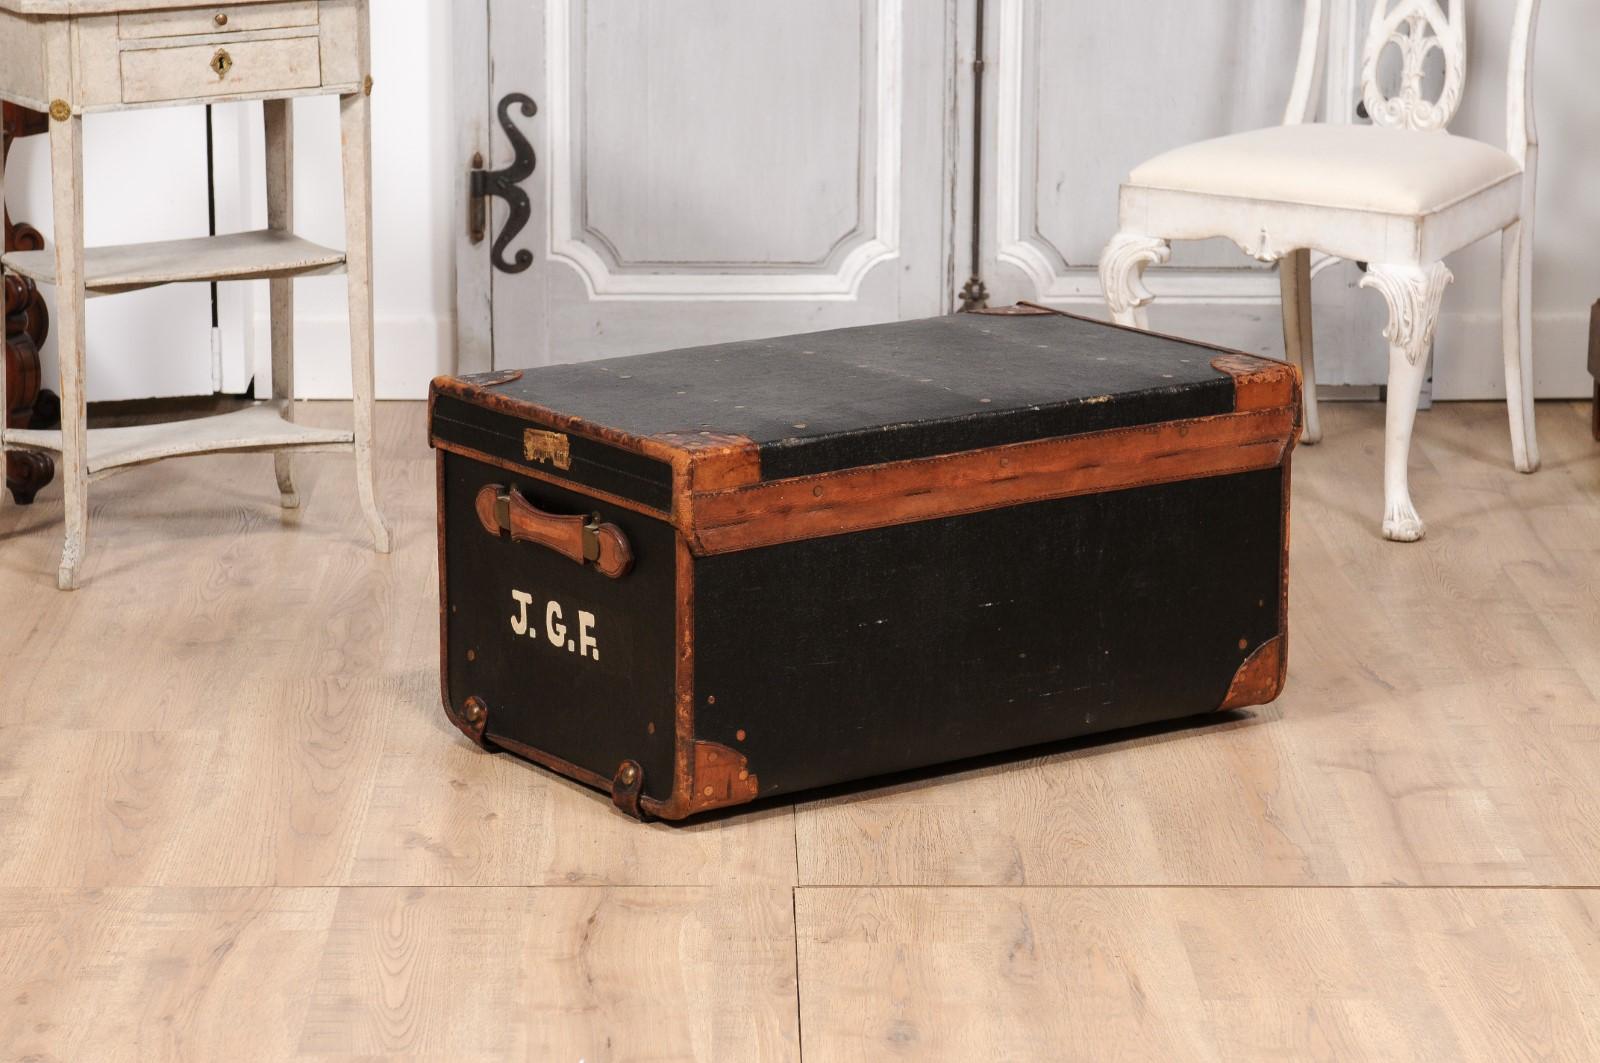 English Victorian Period 19th Century Black Traveling Trunk With Initials J.G.F. For Sale 7